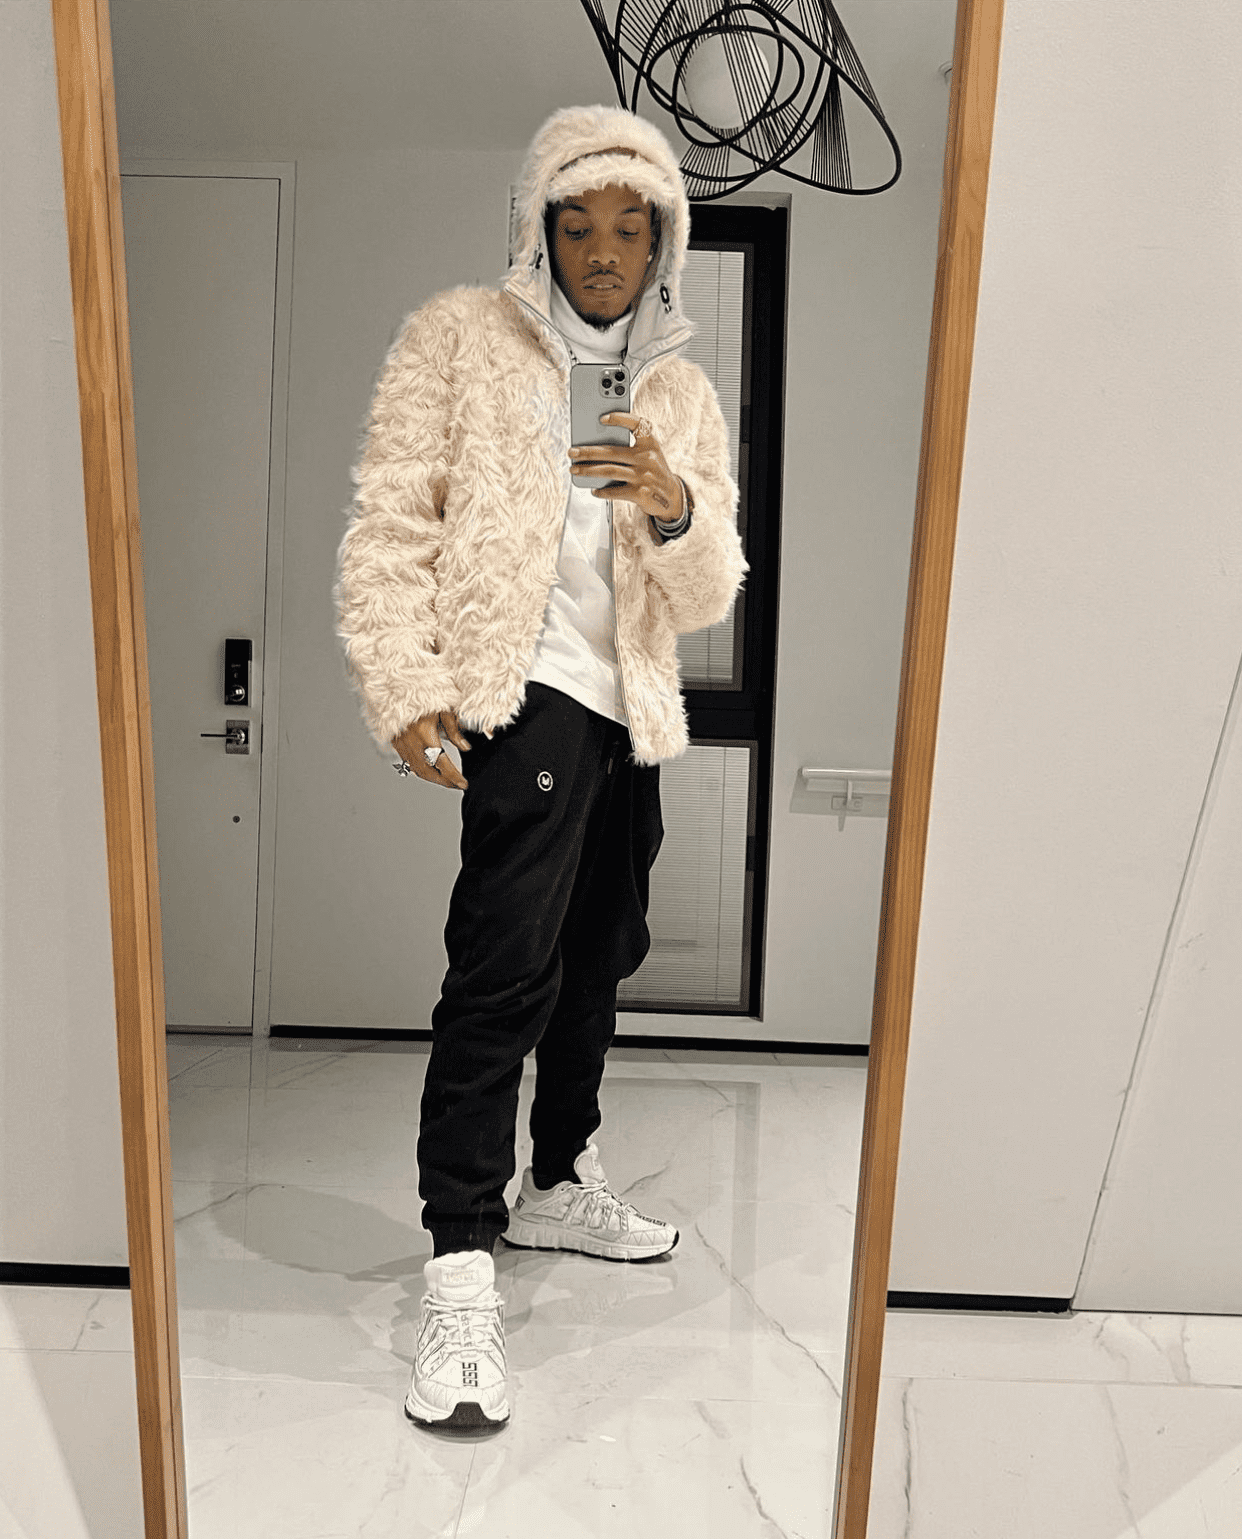 Tekno Biography, Net Worth, Relationship and Songs EntsToday